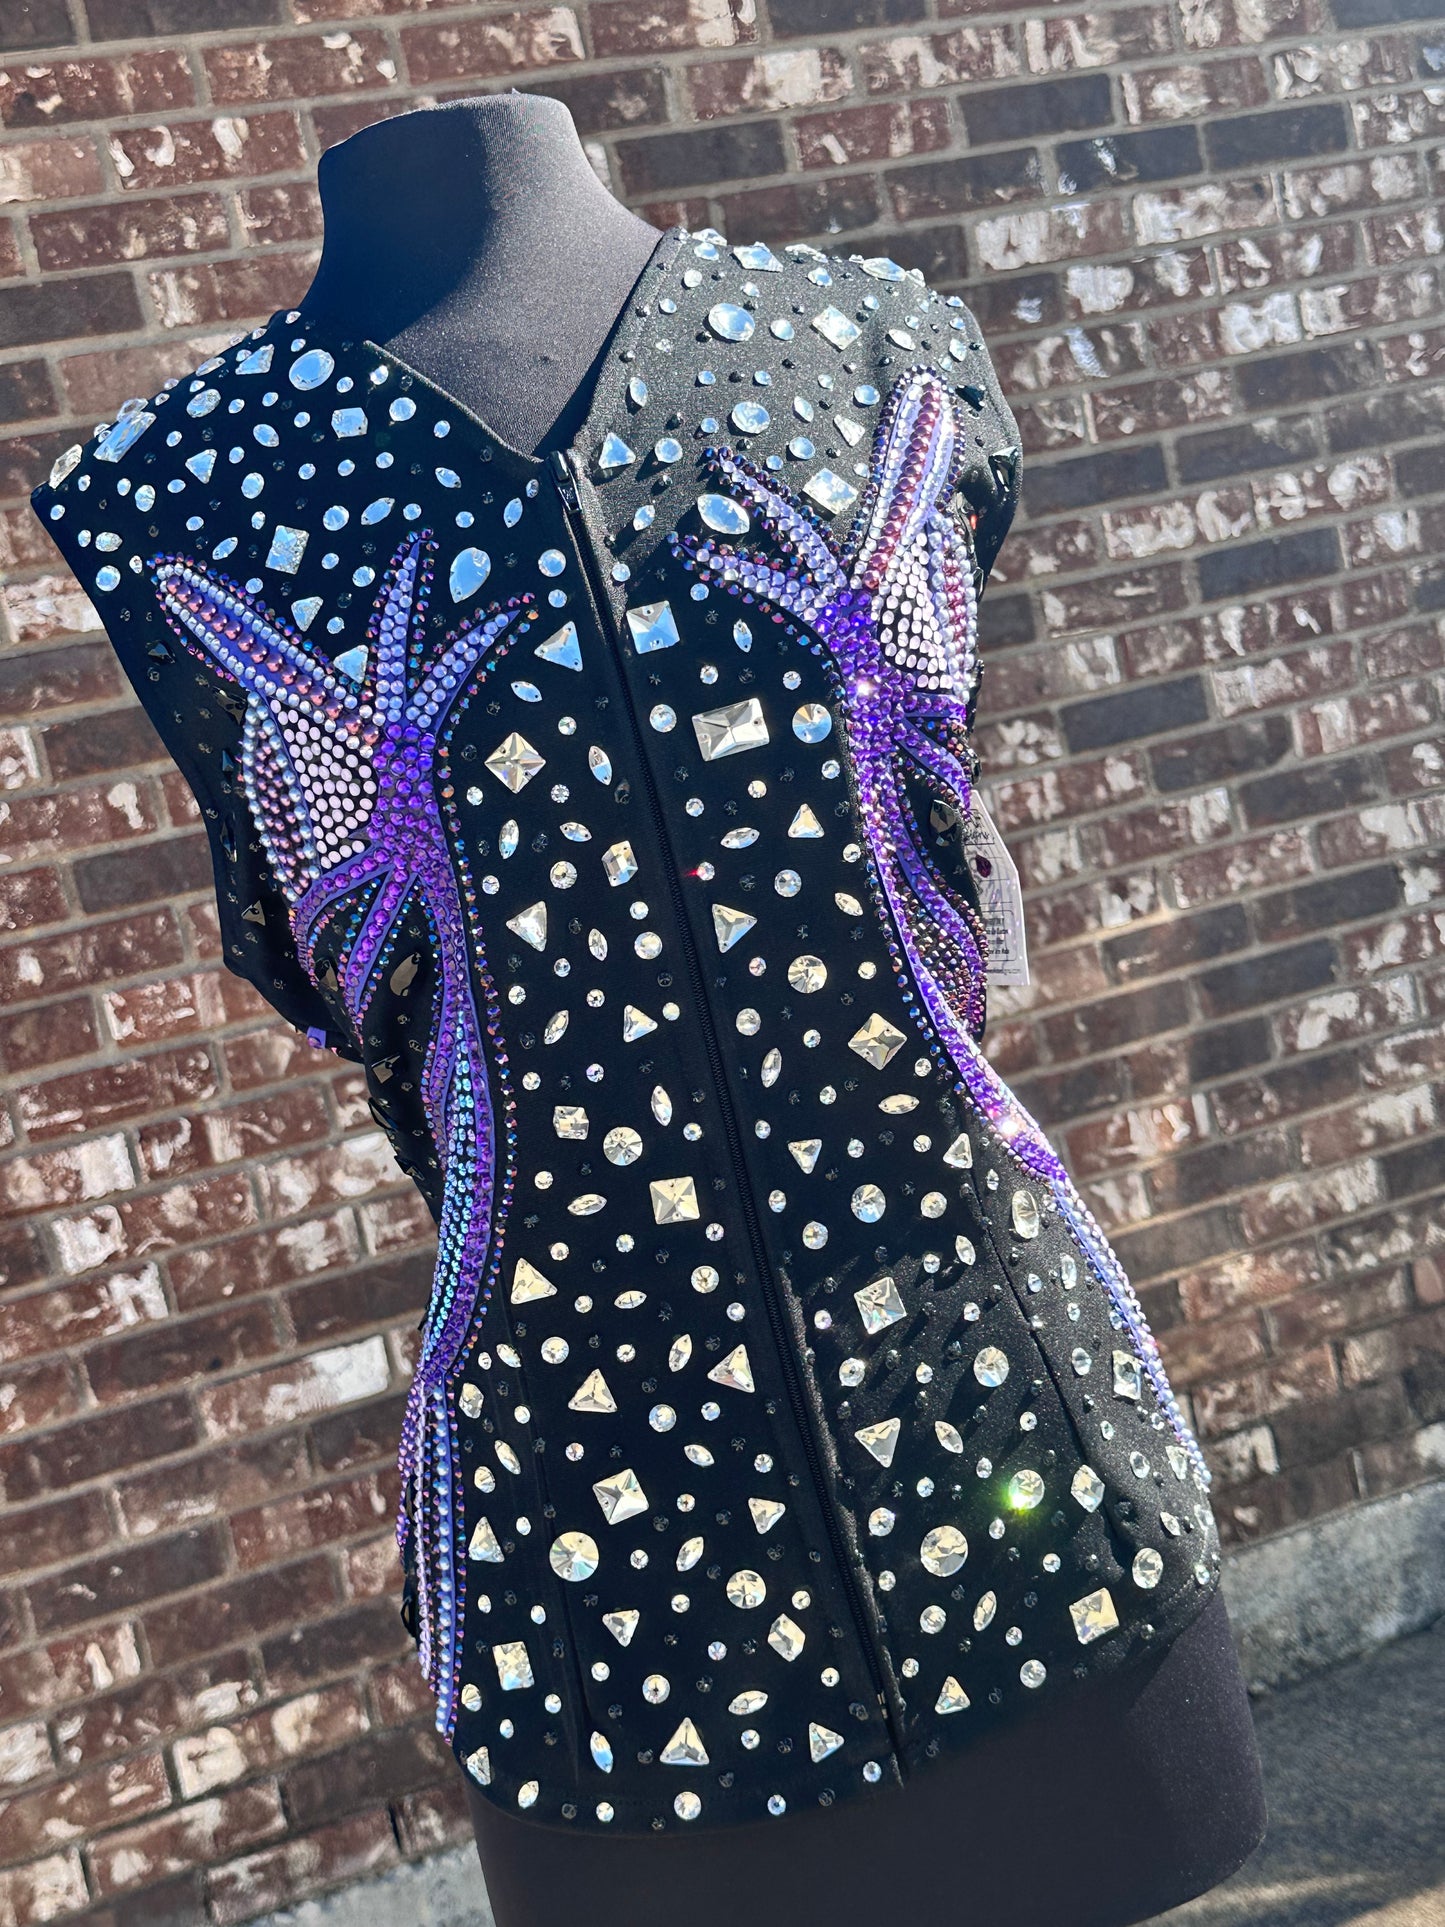 XL vest with black, clear crystals and purples